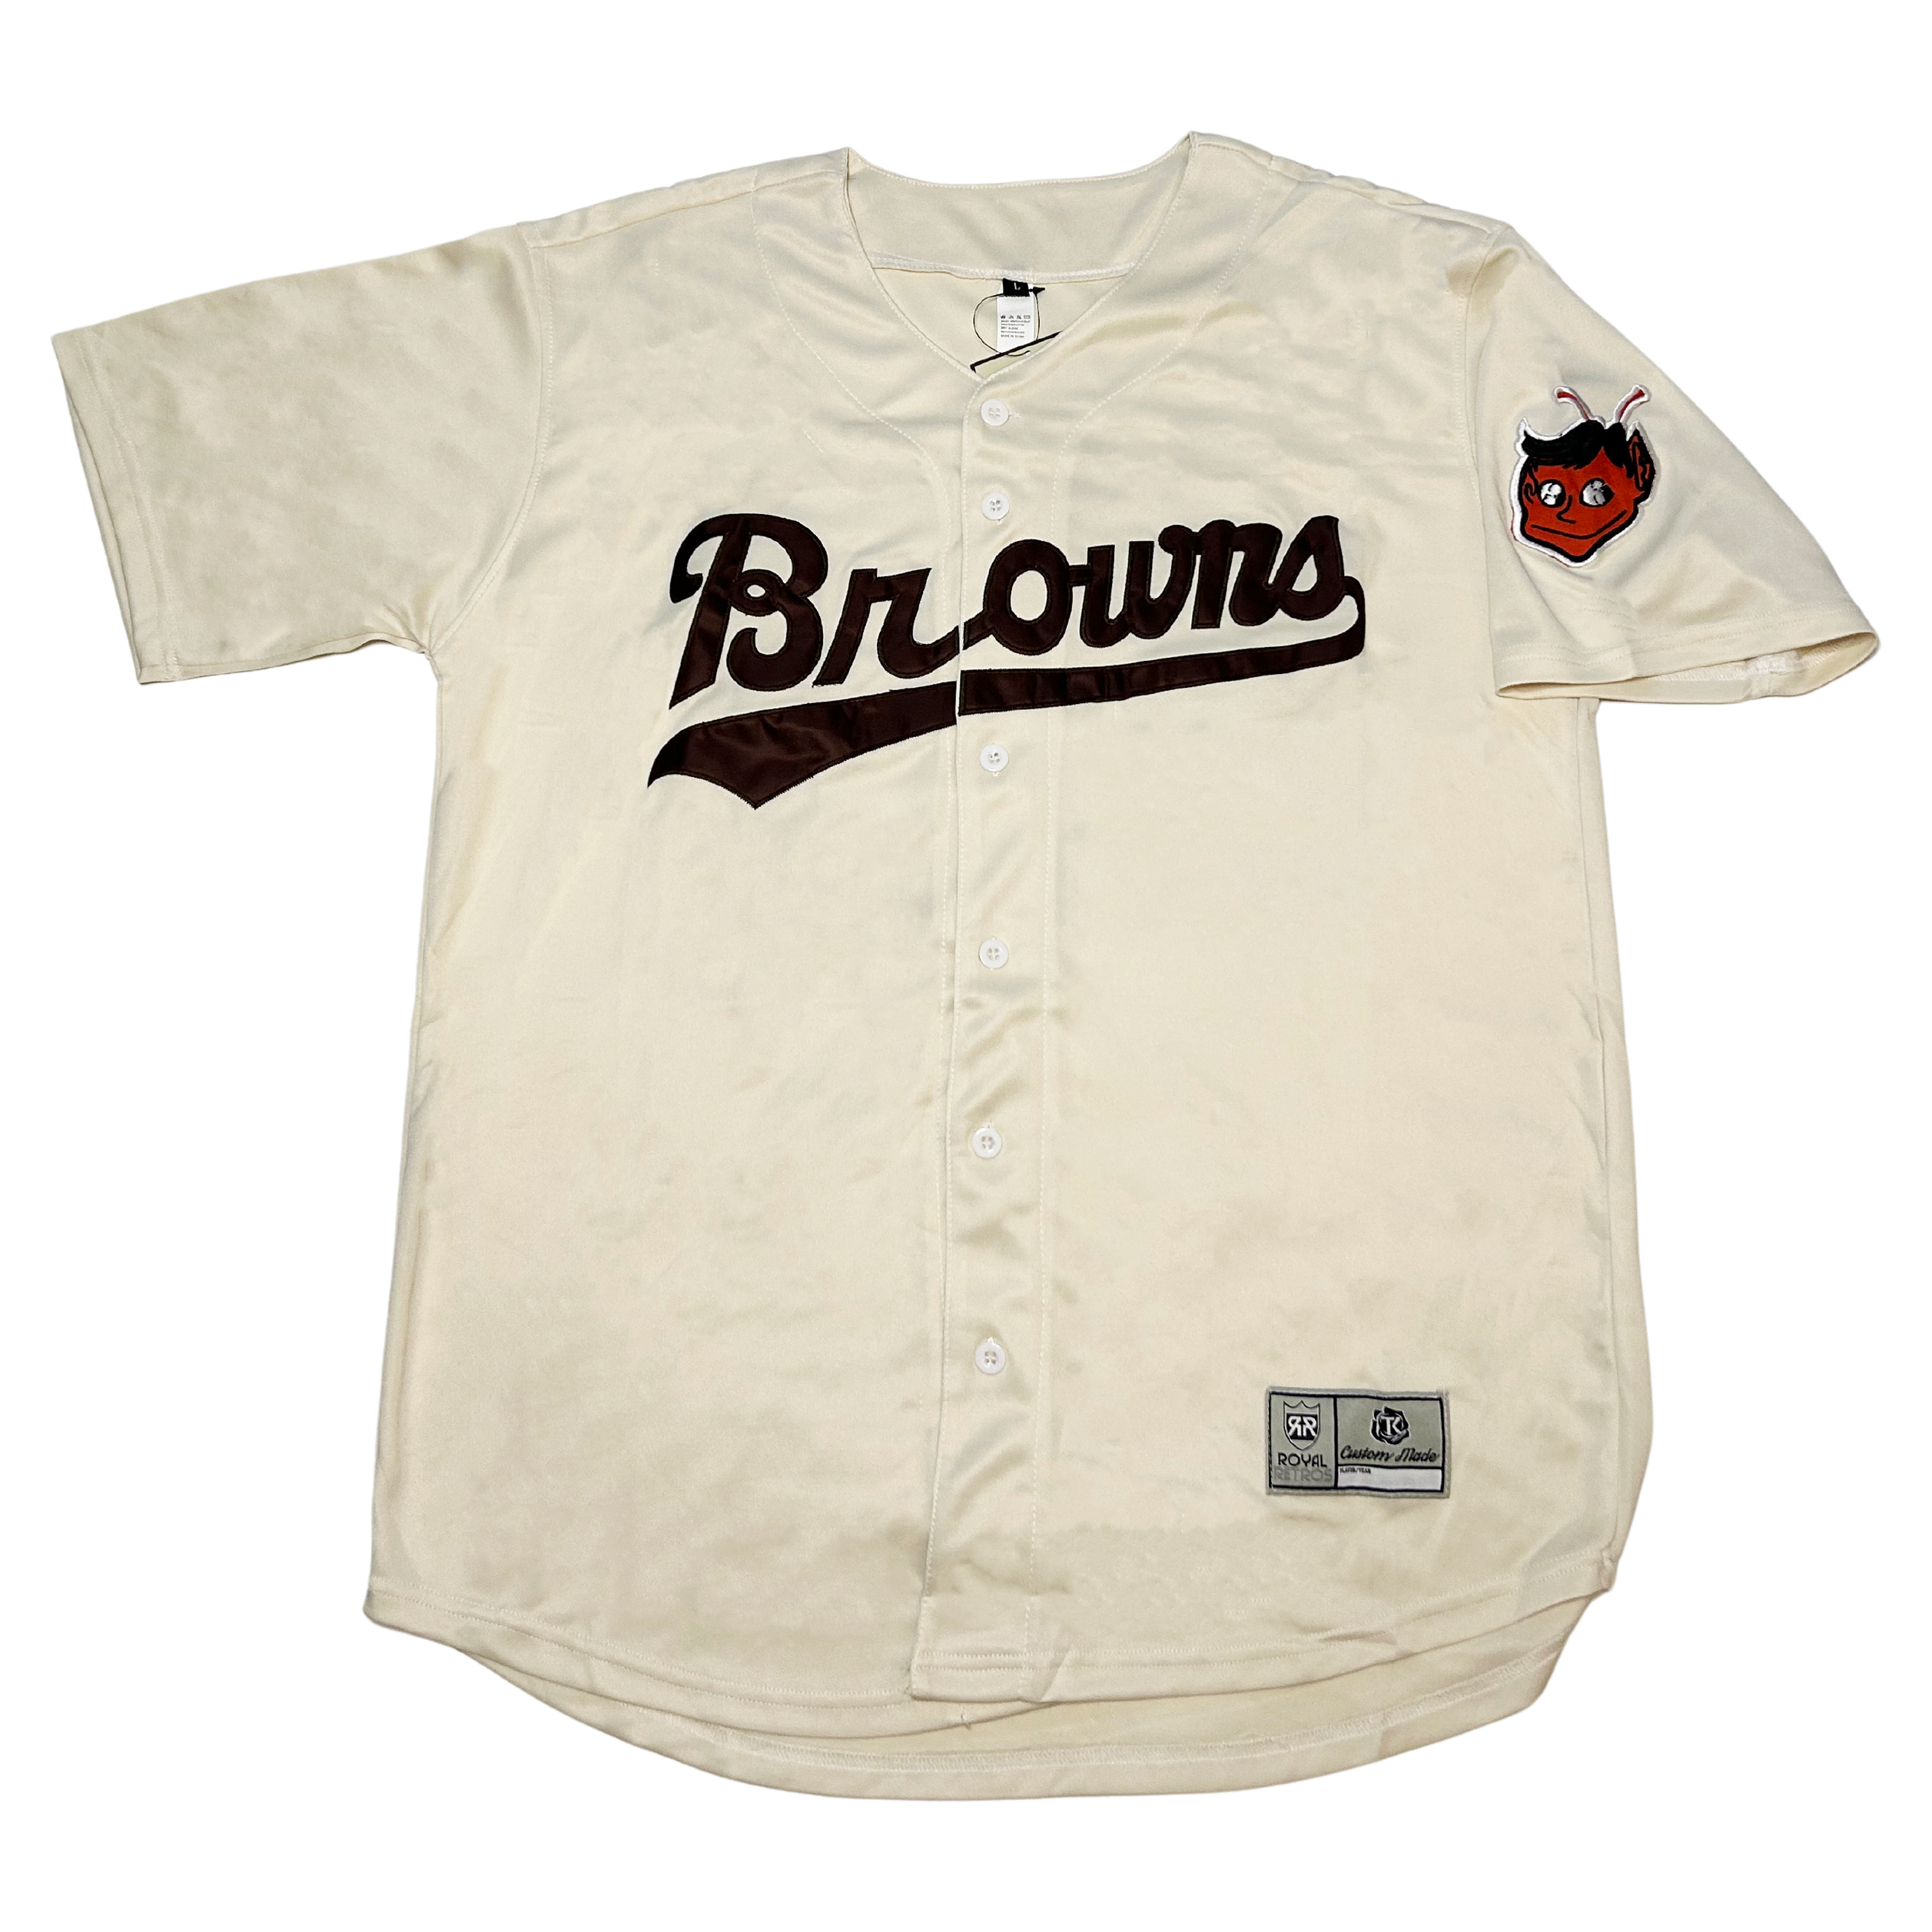 St. Louis Browns Fanclub: Brown Baseball Uniforms, a Rarity, May Be  Returning Soon